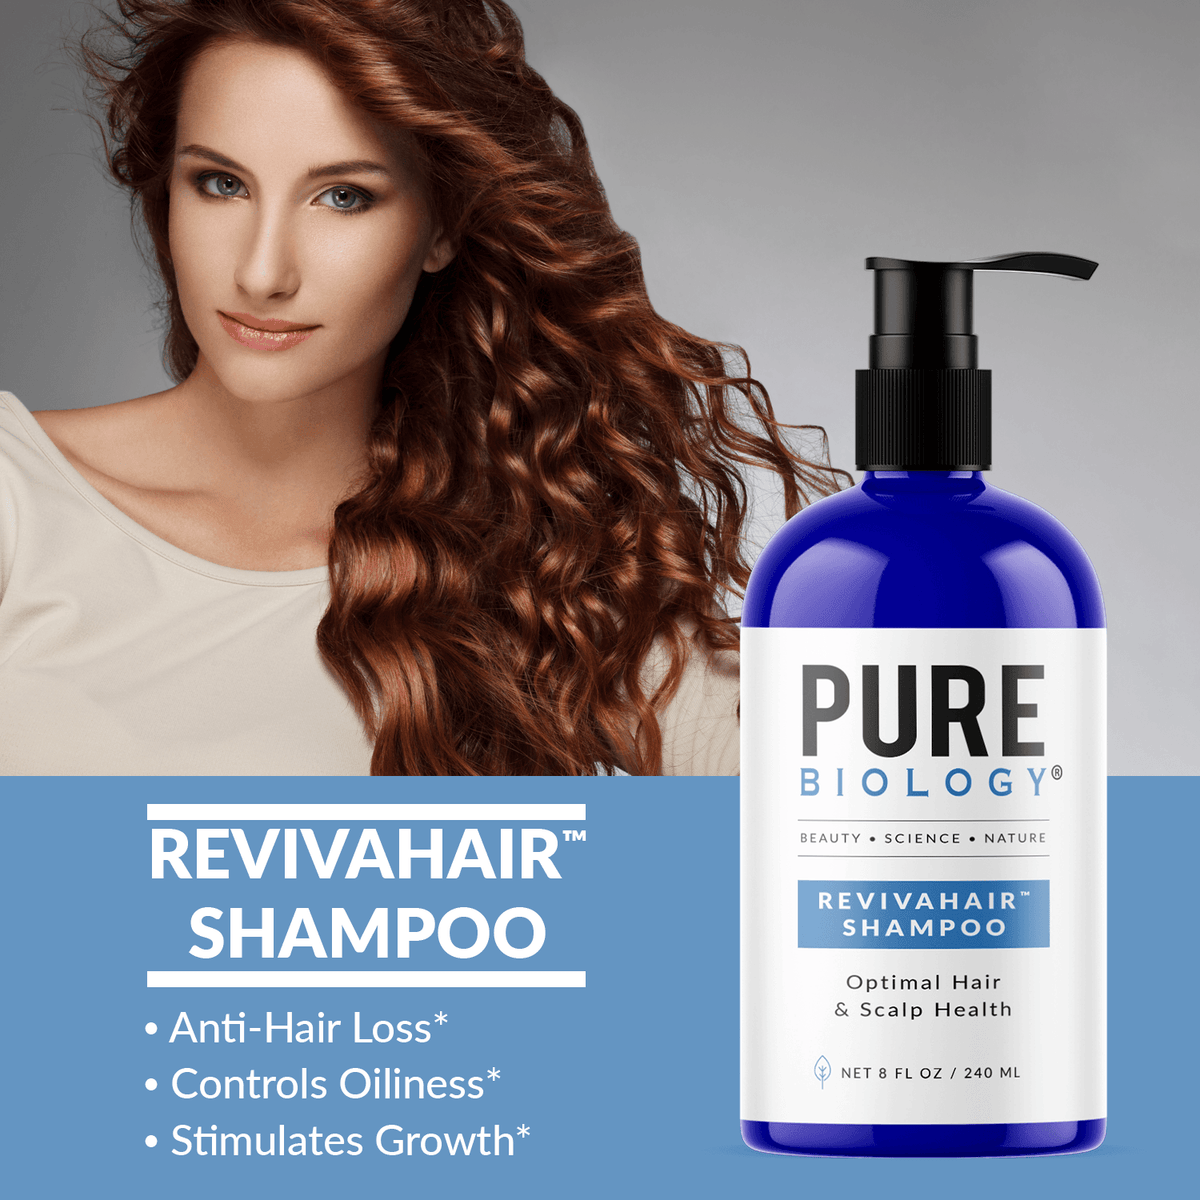 PURE HAIR CARE